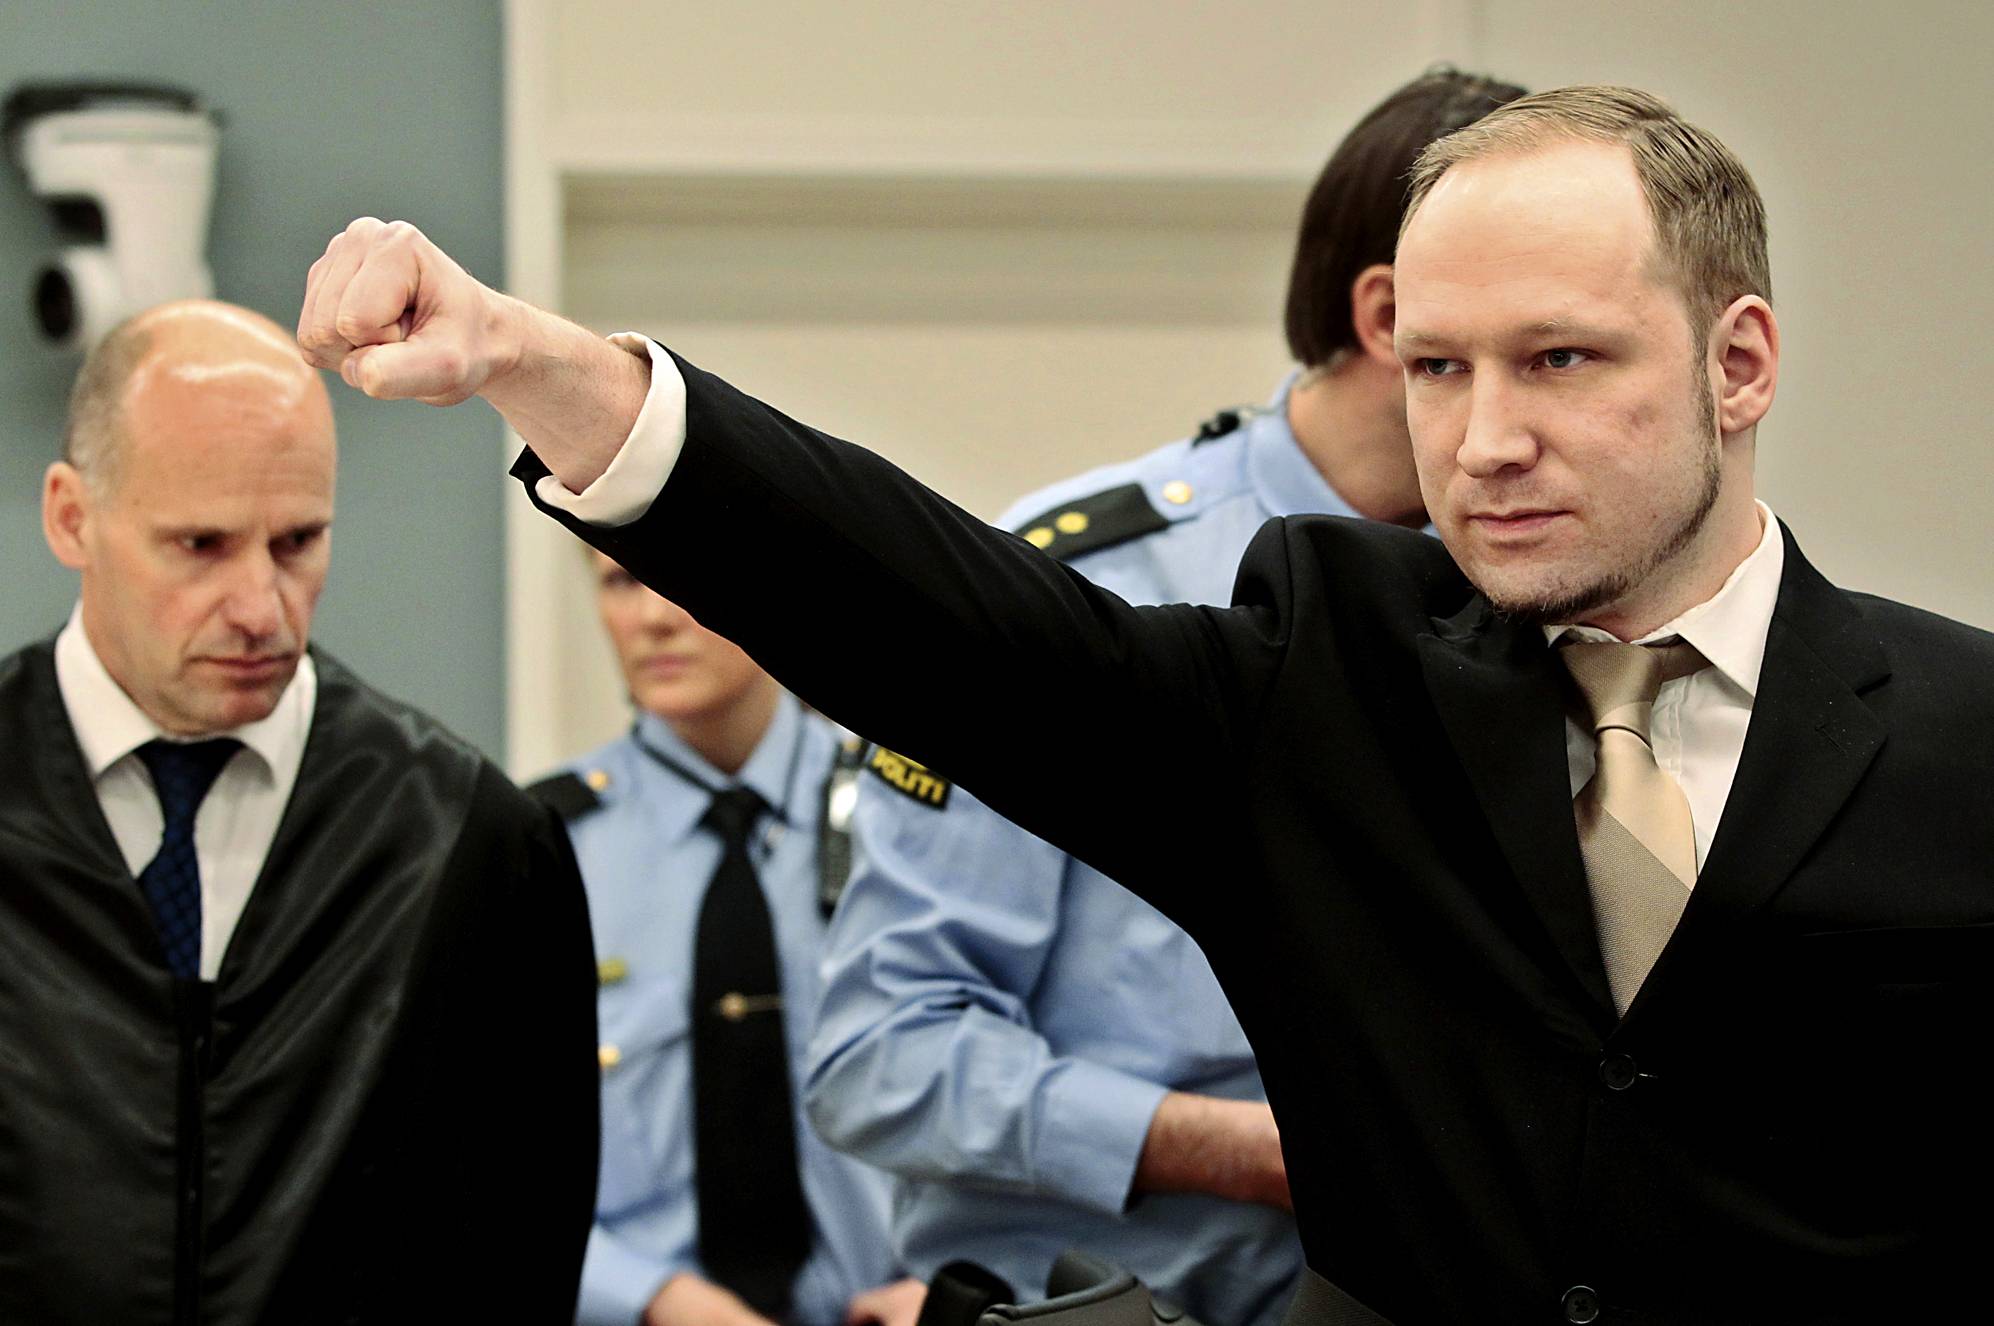 Norway Killer Admits Massacre, Claims Self-Defense - Right-wing fanatic Anders Behring Breivik admitted Monday to a bombing and shooting massacre that killed 77 people in Norway but pleaded not guilty to criminal charges, saying he was acting in self-defense.\r(Photo: AP Photo/Hakon Mosvold Larsen, Pool)